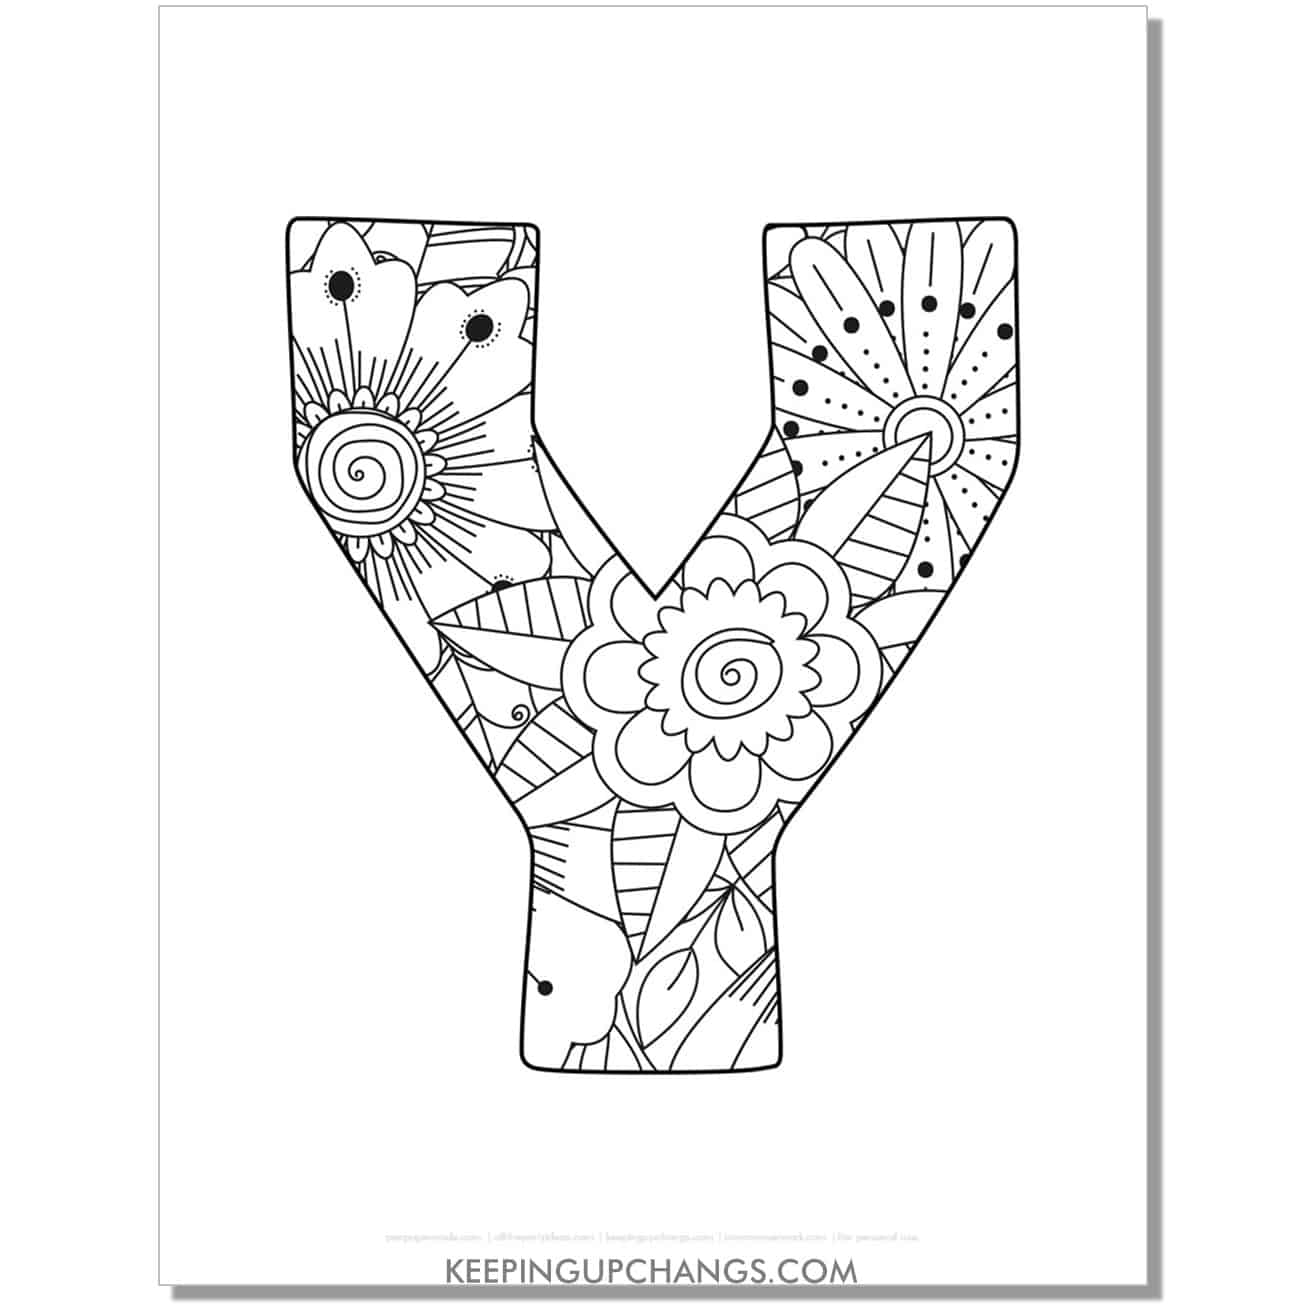 free letter y to color, complex mandala zentangle for adults.